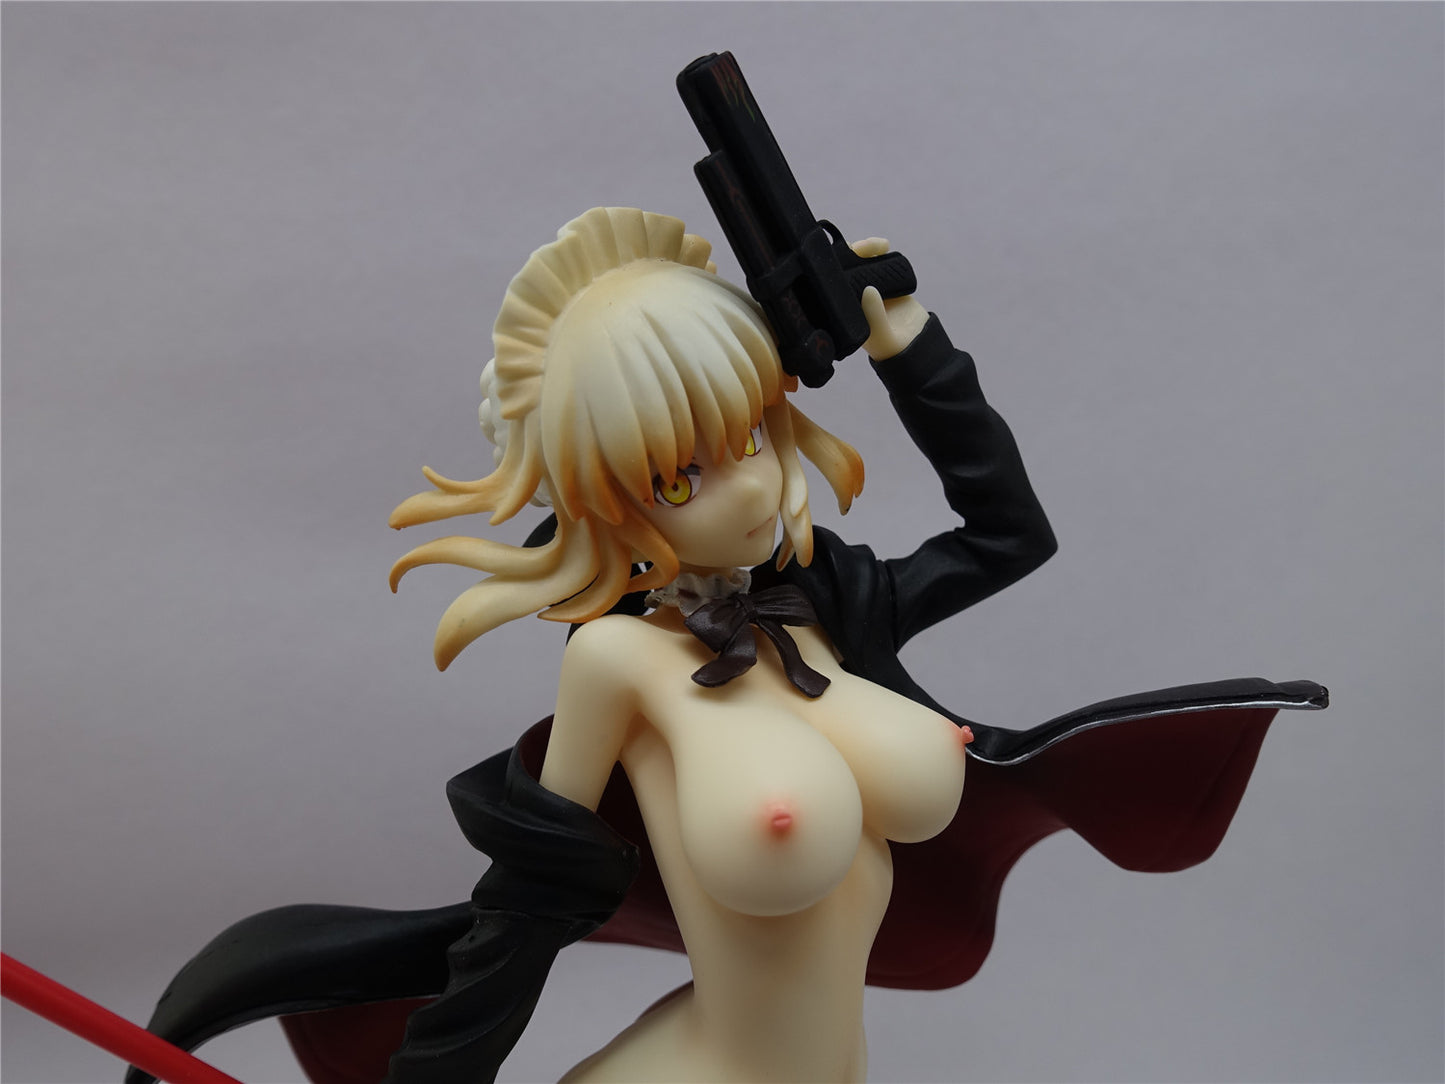 Fate/Grand Order saber figure with gun 1/6 naked anime figure sexy anime girl figure